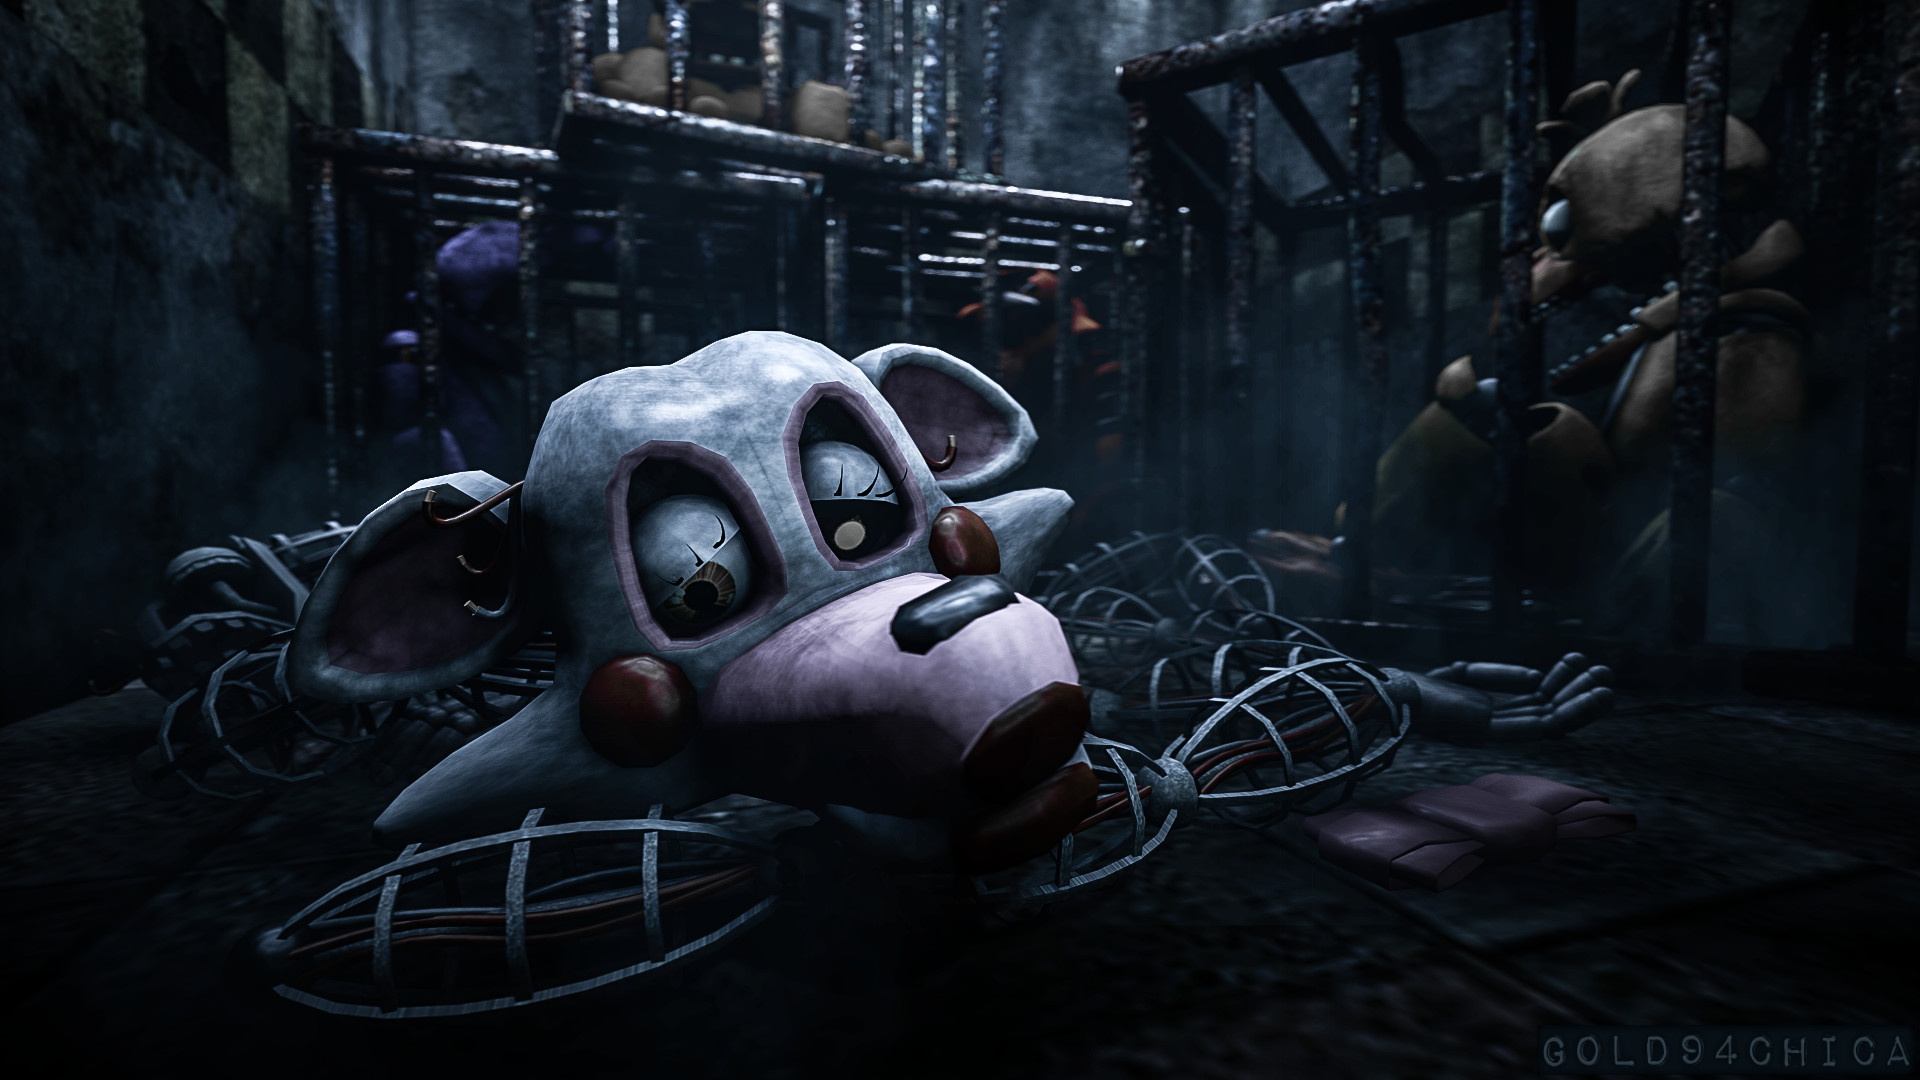 1920x1080 Tossed out with the 'trash' (FNAF2 Mangle SFM) by gold94chica